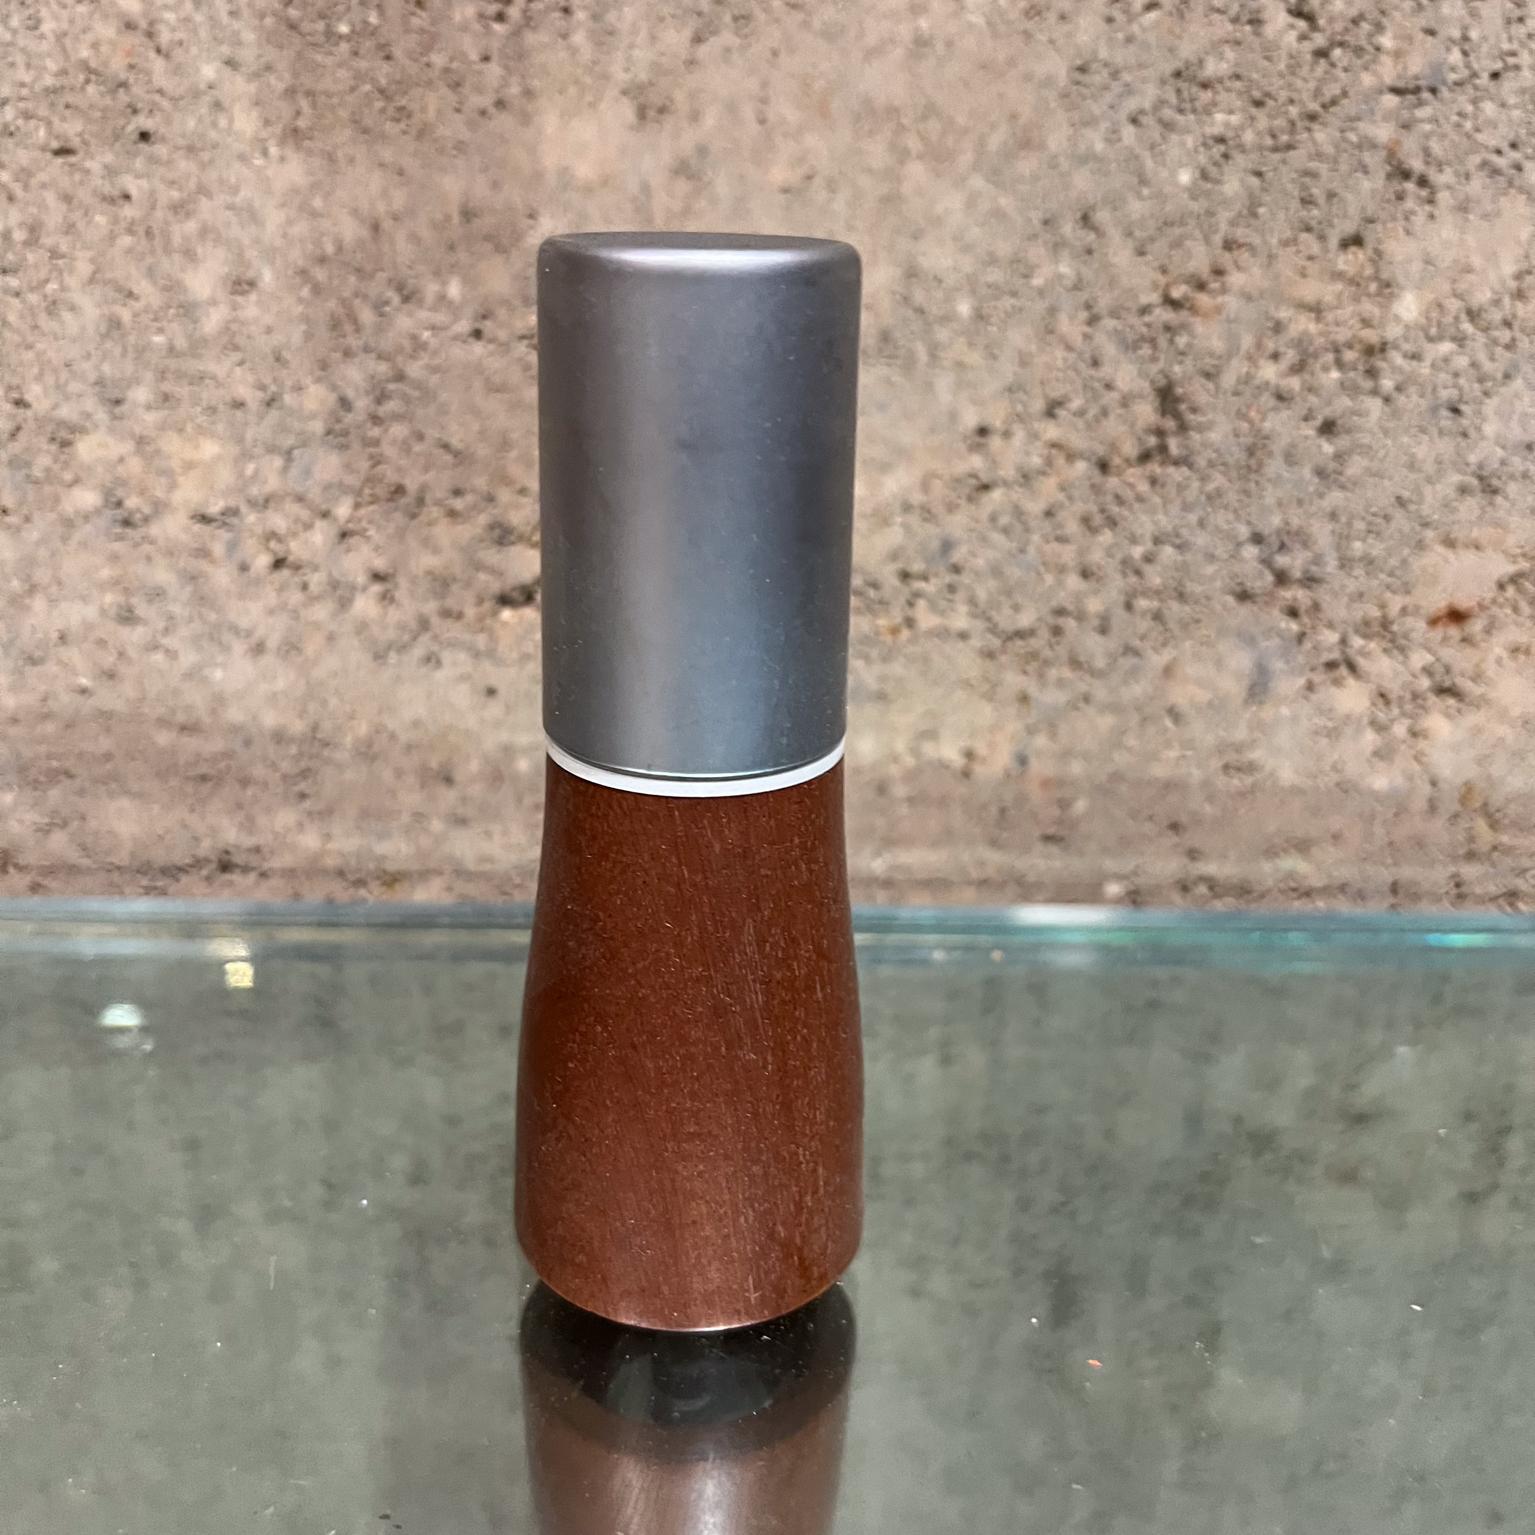 AMBIANIC presents
Modern Design Teak Wood Peppermill Grinder
Aluminum Cap
4.75 H x 1.75 in diameter
Original Preowned unrestored Condition
Refer to images please.